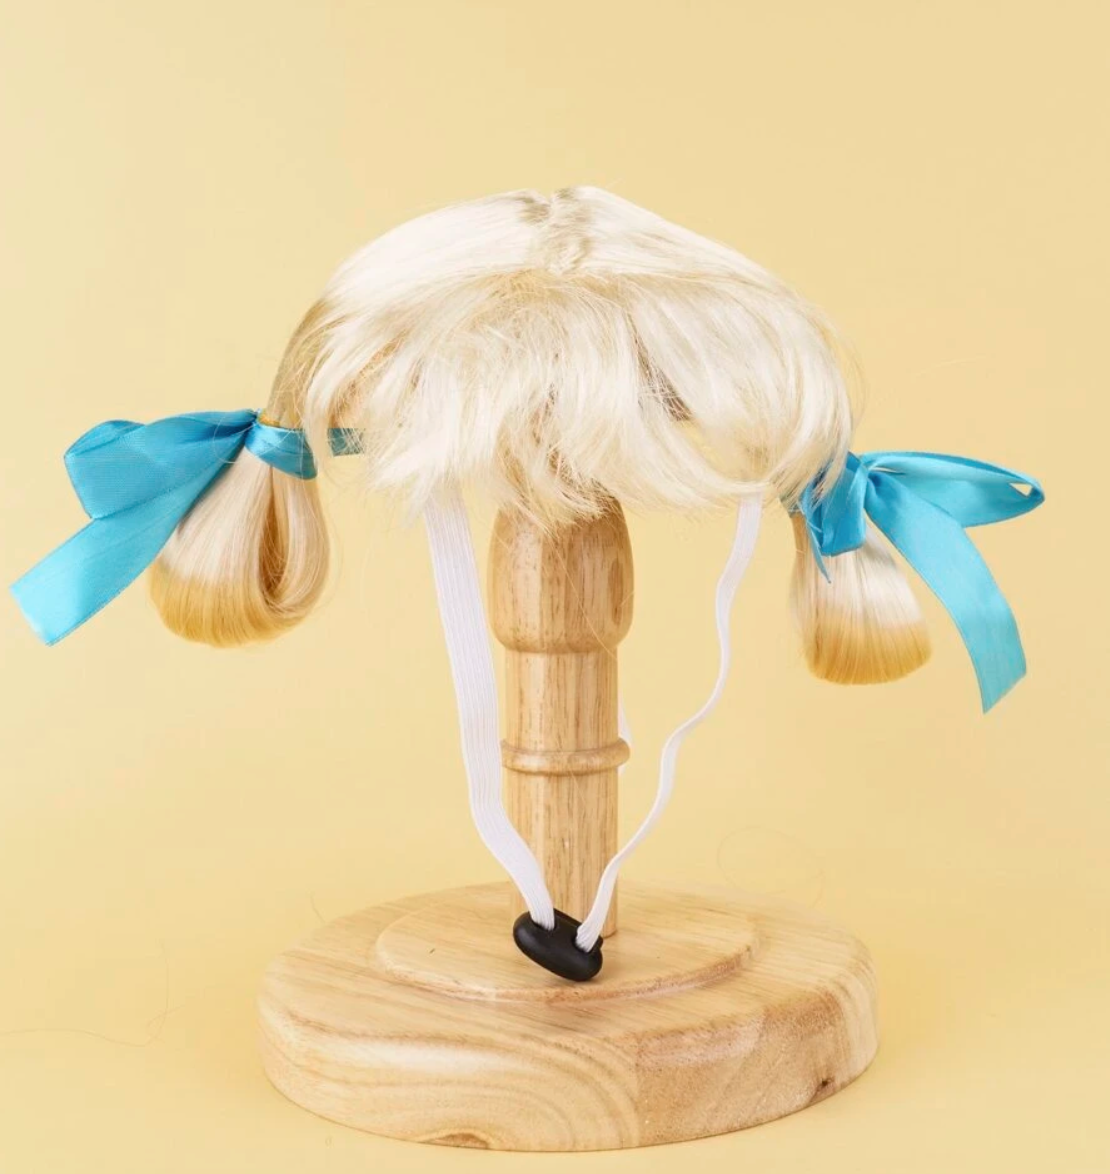 Britney Spears Dress Up Blonde Pony Tail with Ribbons Pet Wig